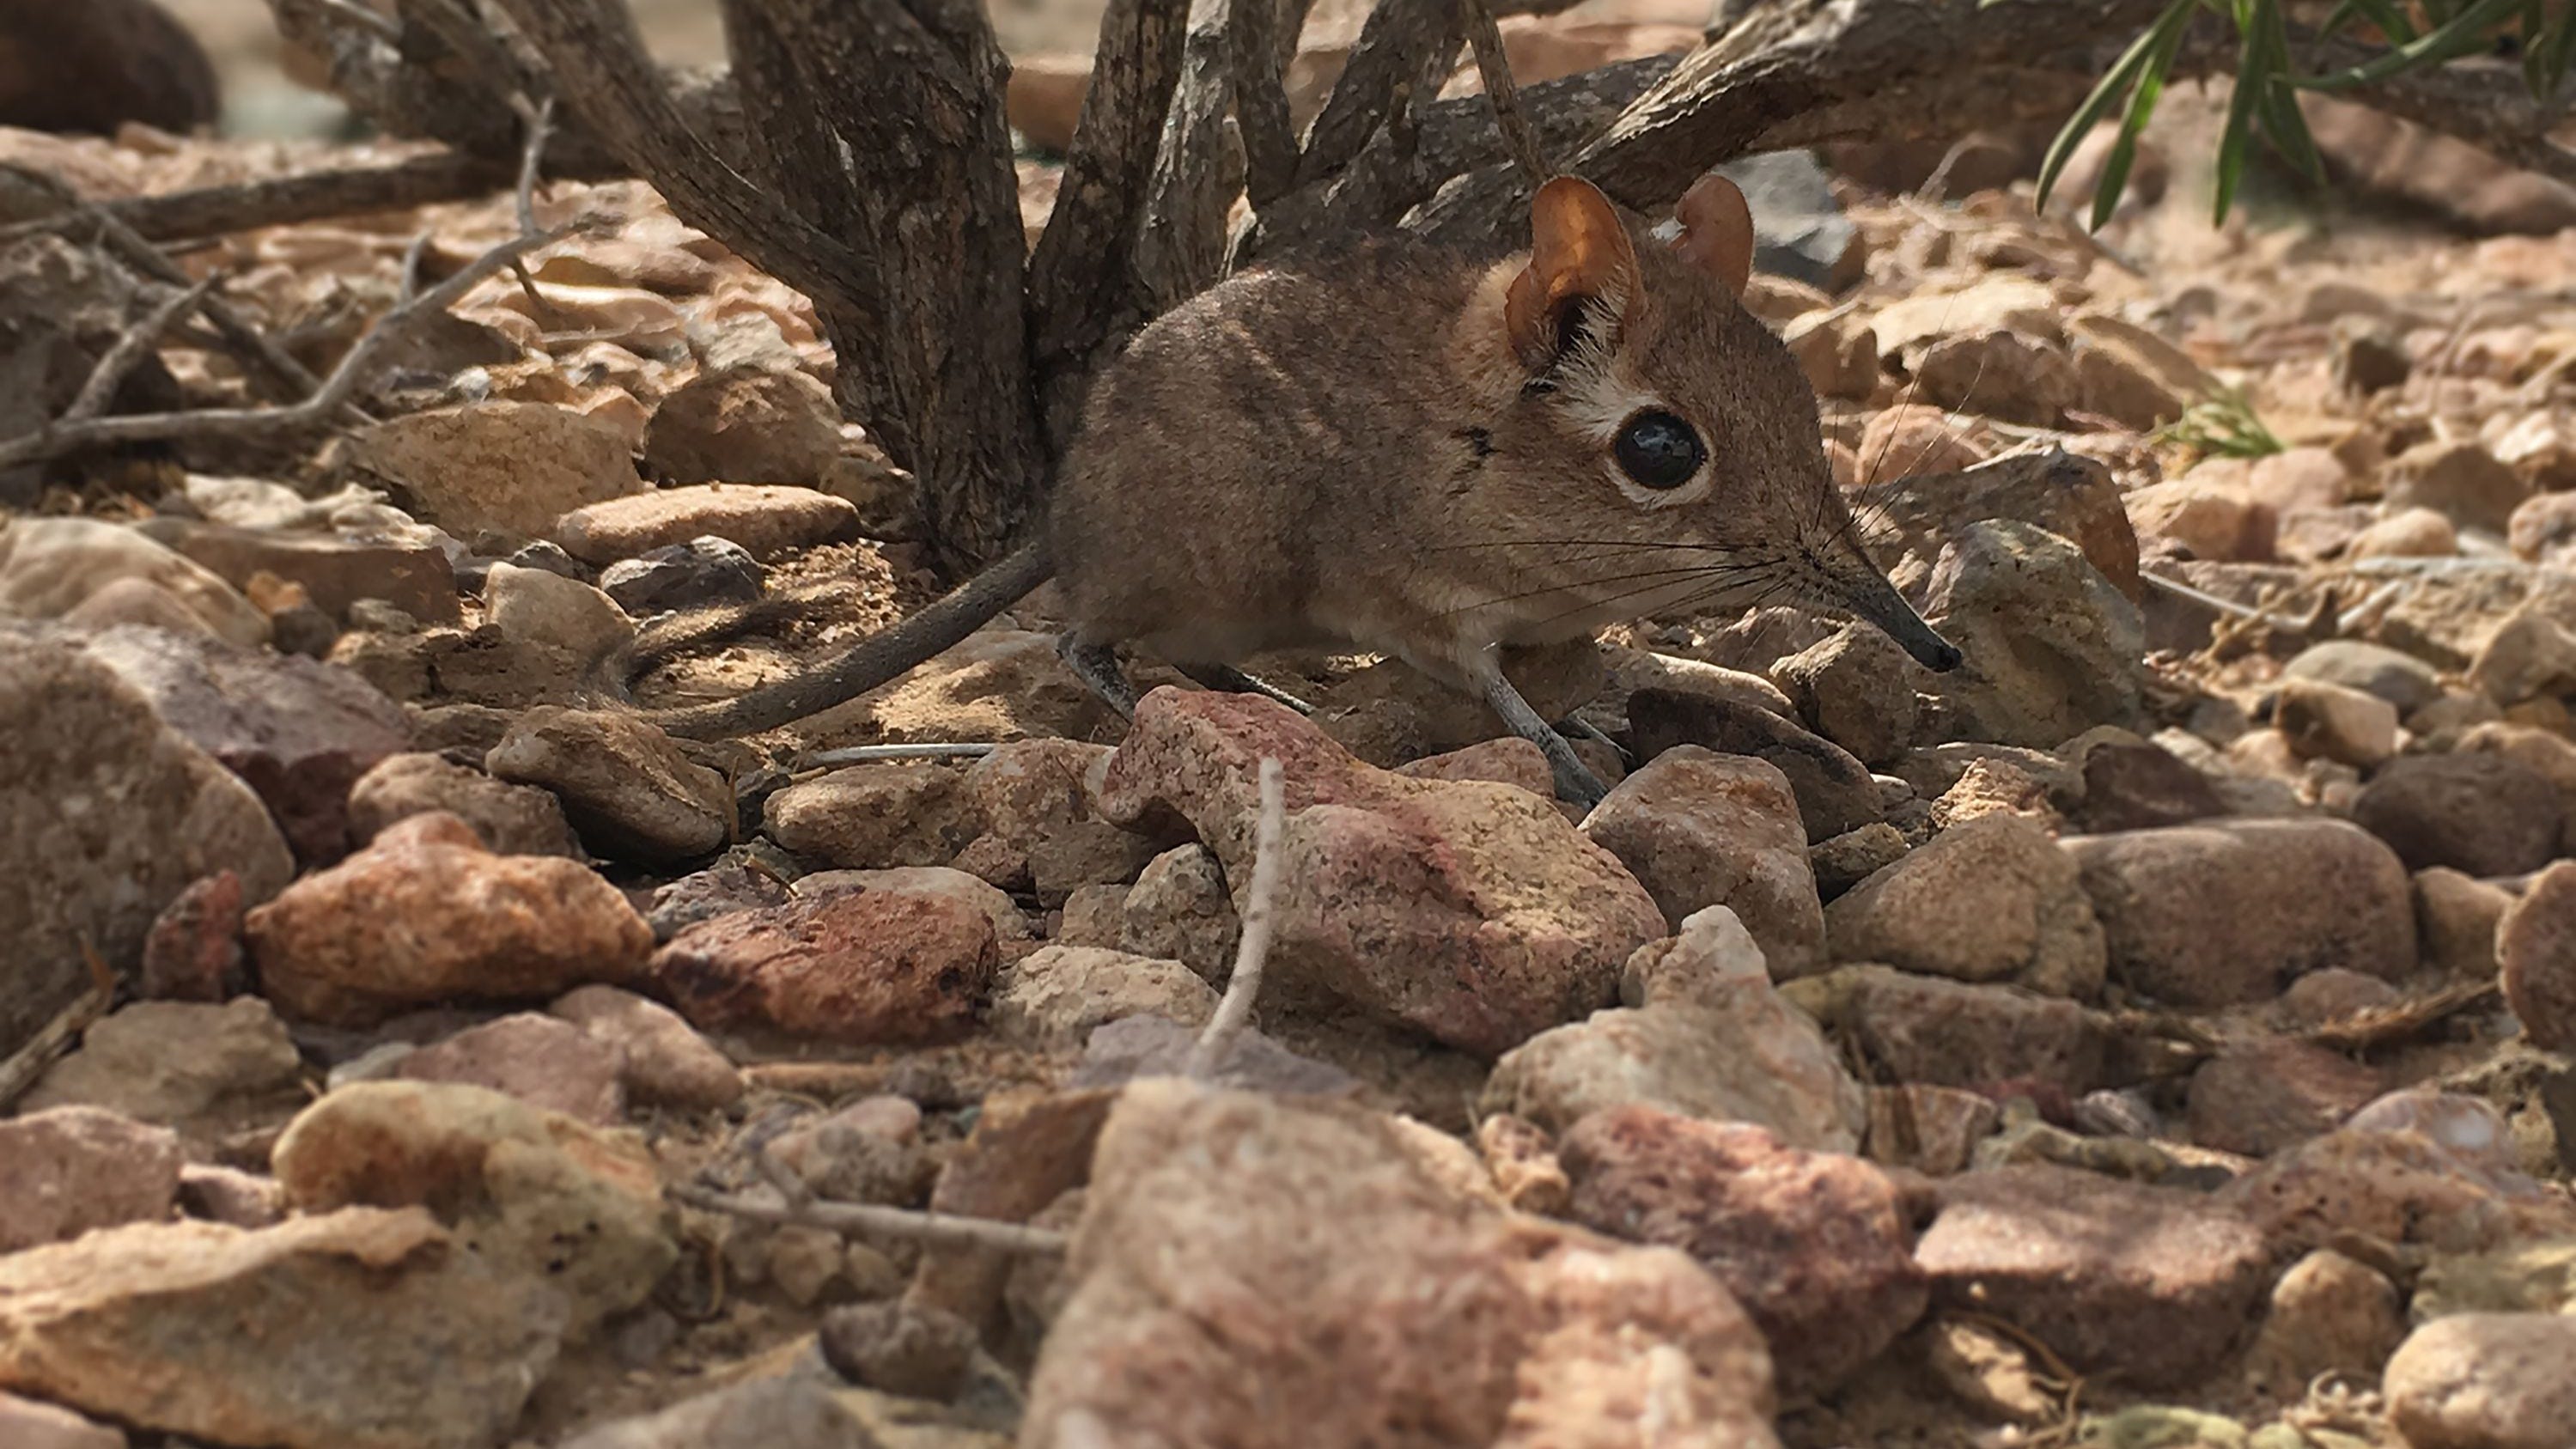 Missing for over 50 years: Long-lost elephant shrew resurfaces in Africa